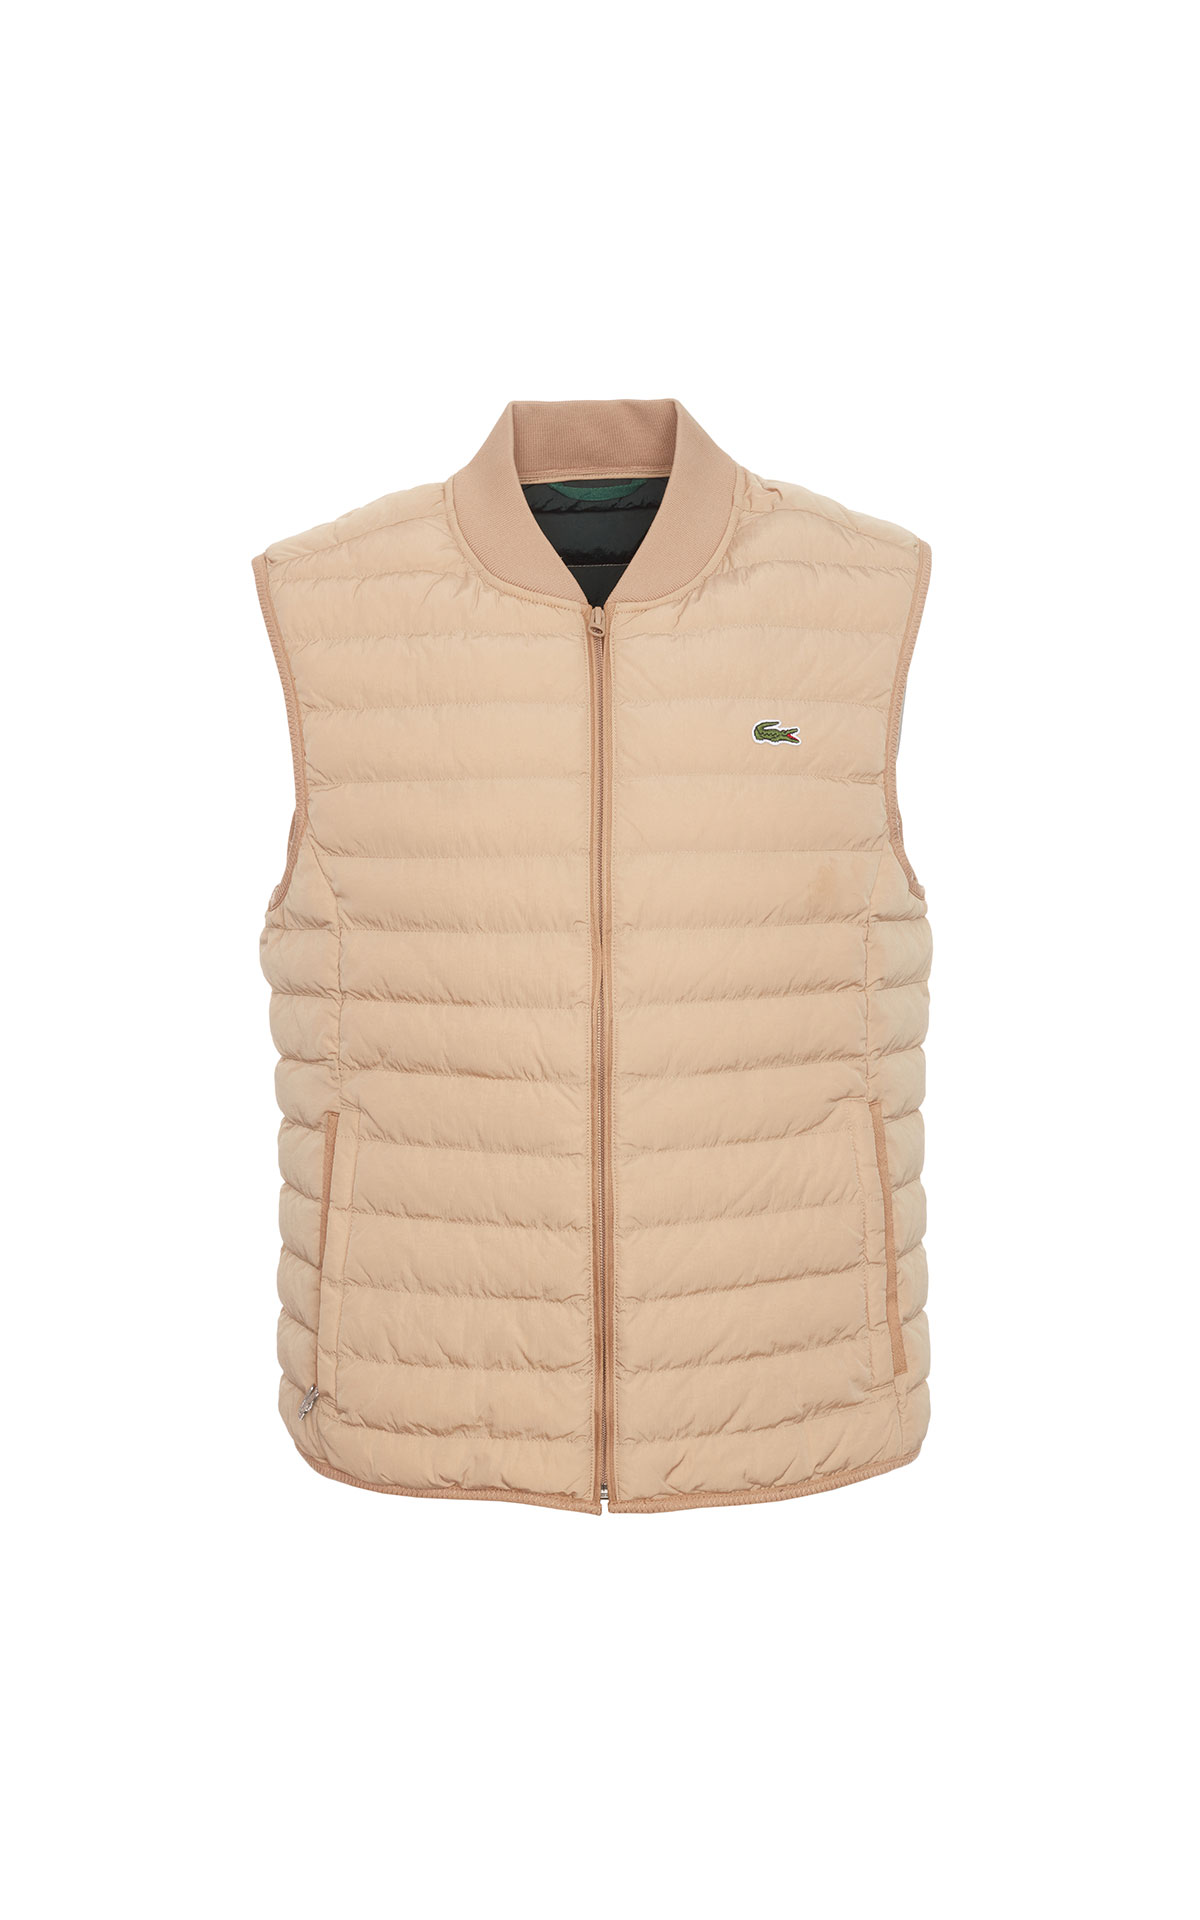 Lacoste Gilet from Bicester Village